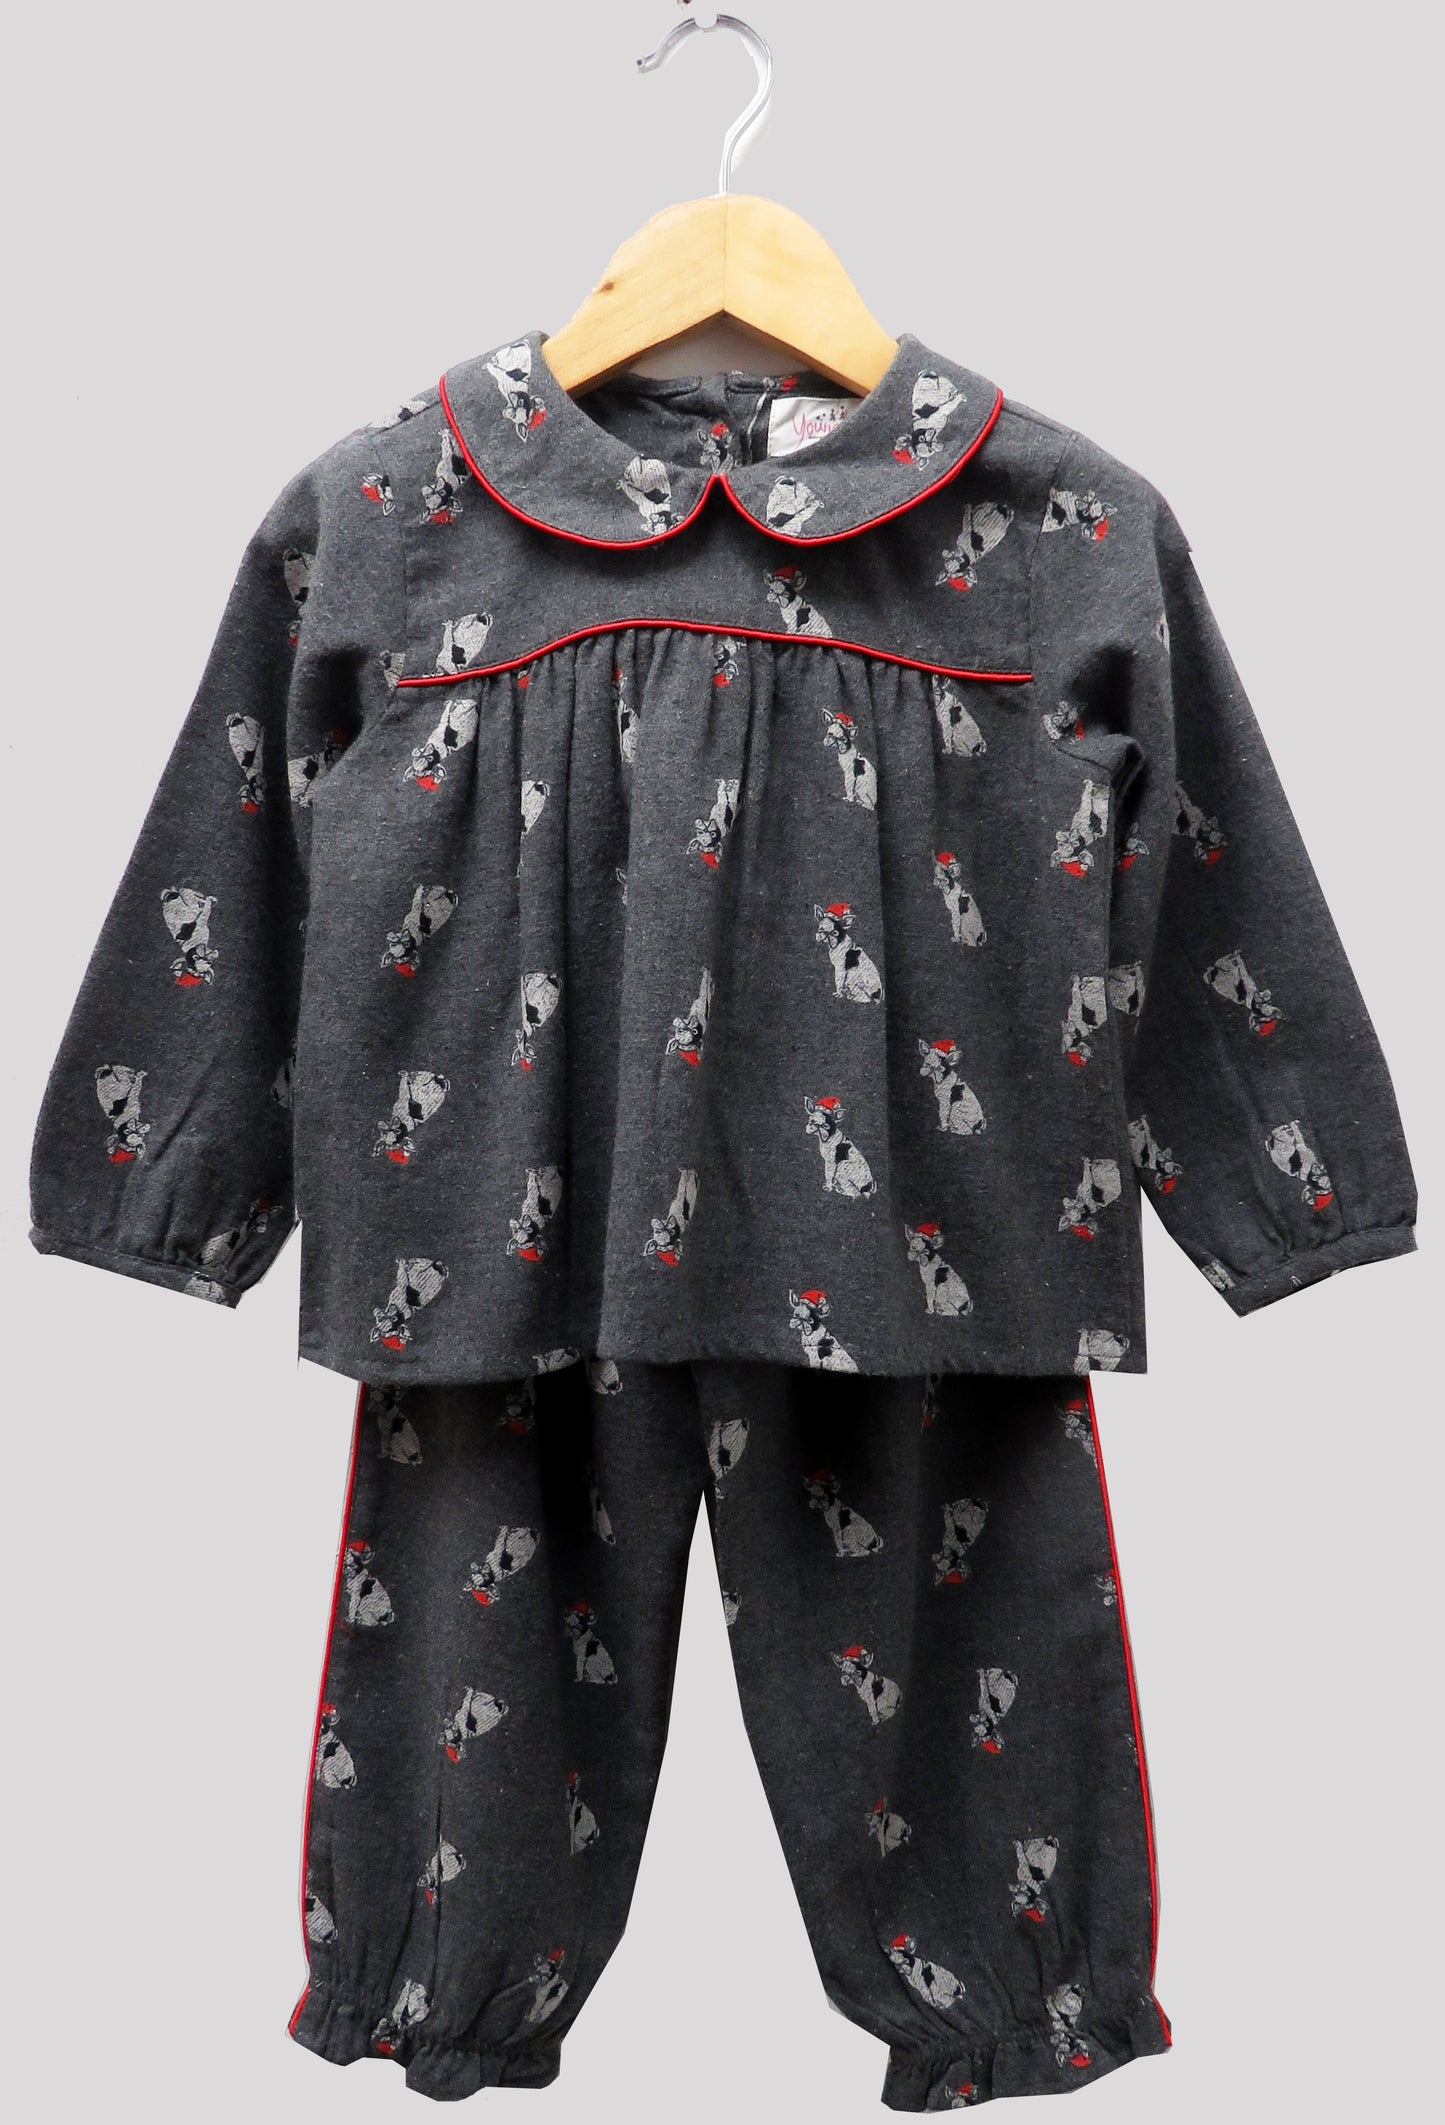 DOGGIE PRINT GREY WHITE AND RED NIGHTSUIT